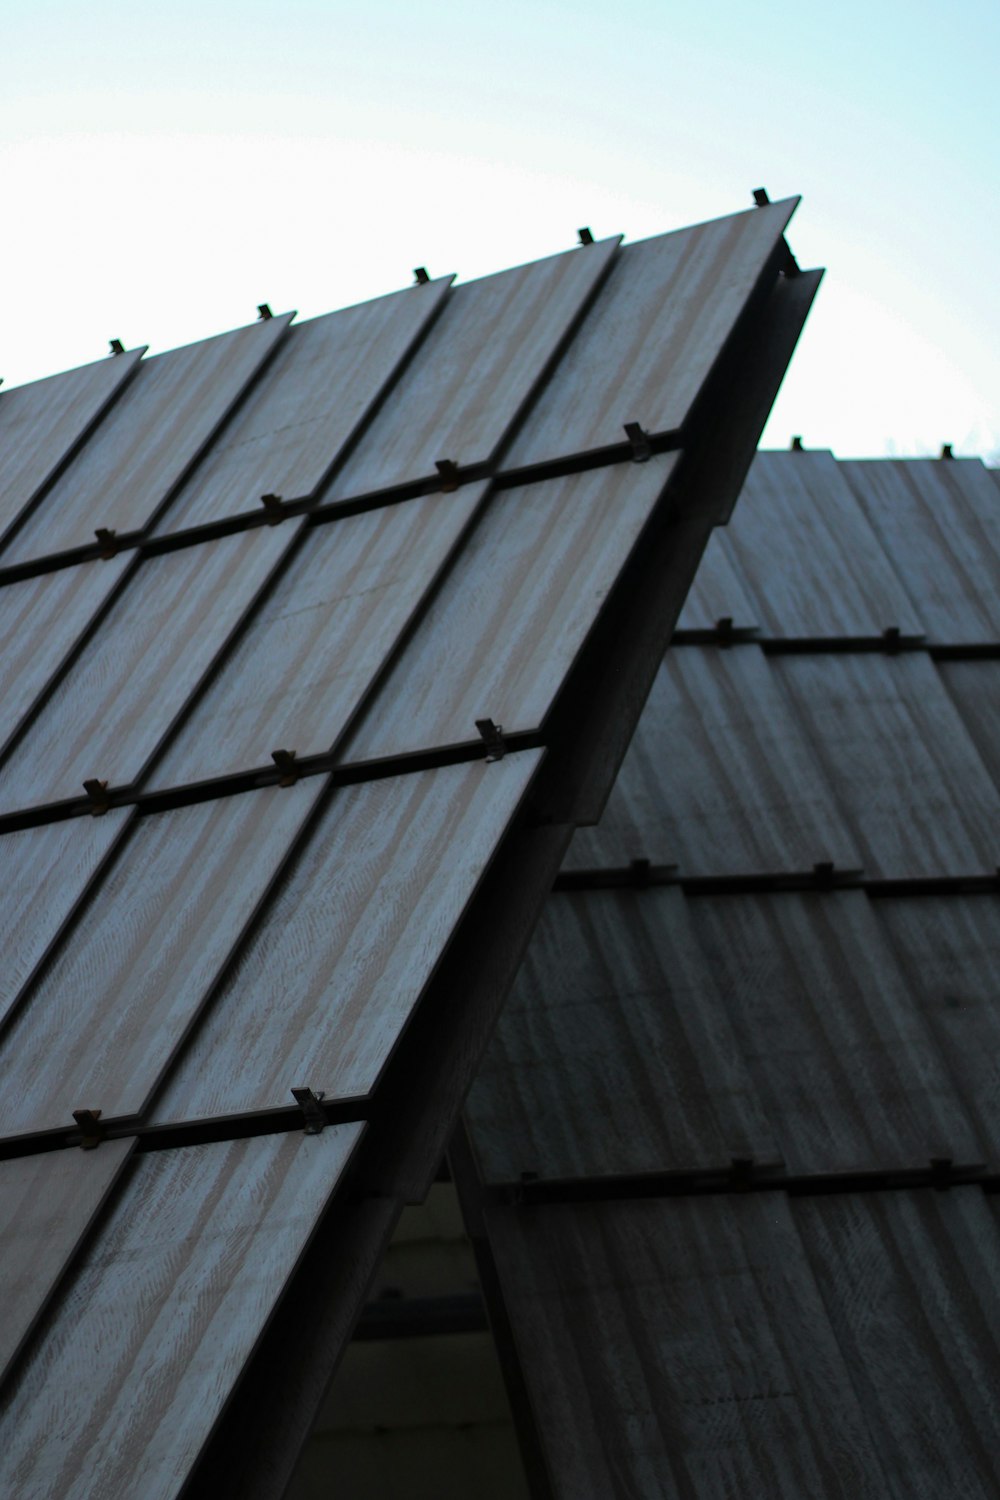 a close up of a roof with a bird perched on top of it